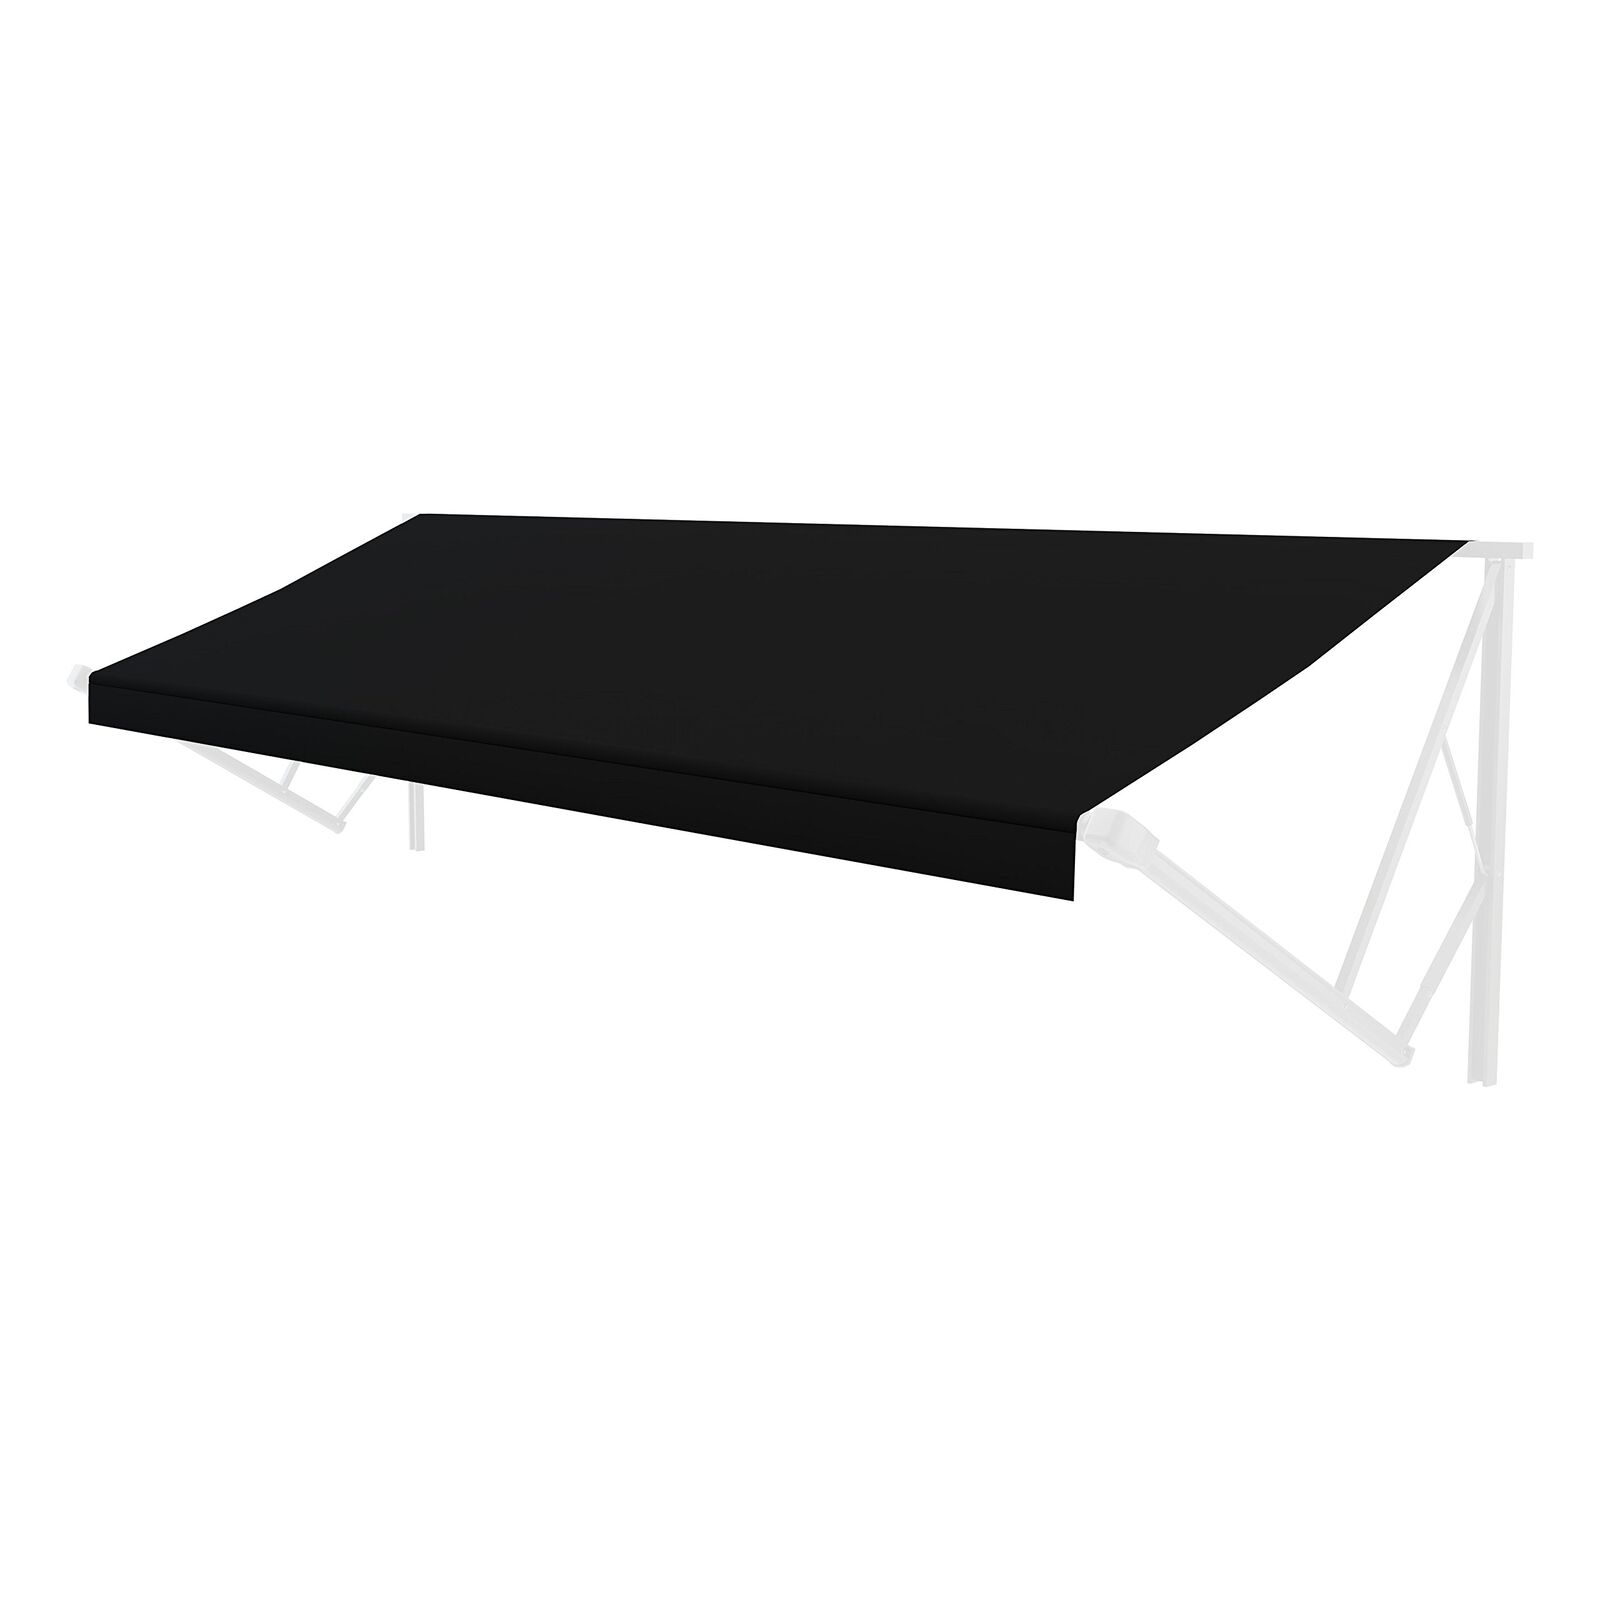 Lippert V000334368 Universal Solid Black Vinyl Canopy Fabric for Patio Awning